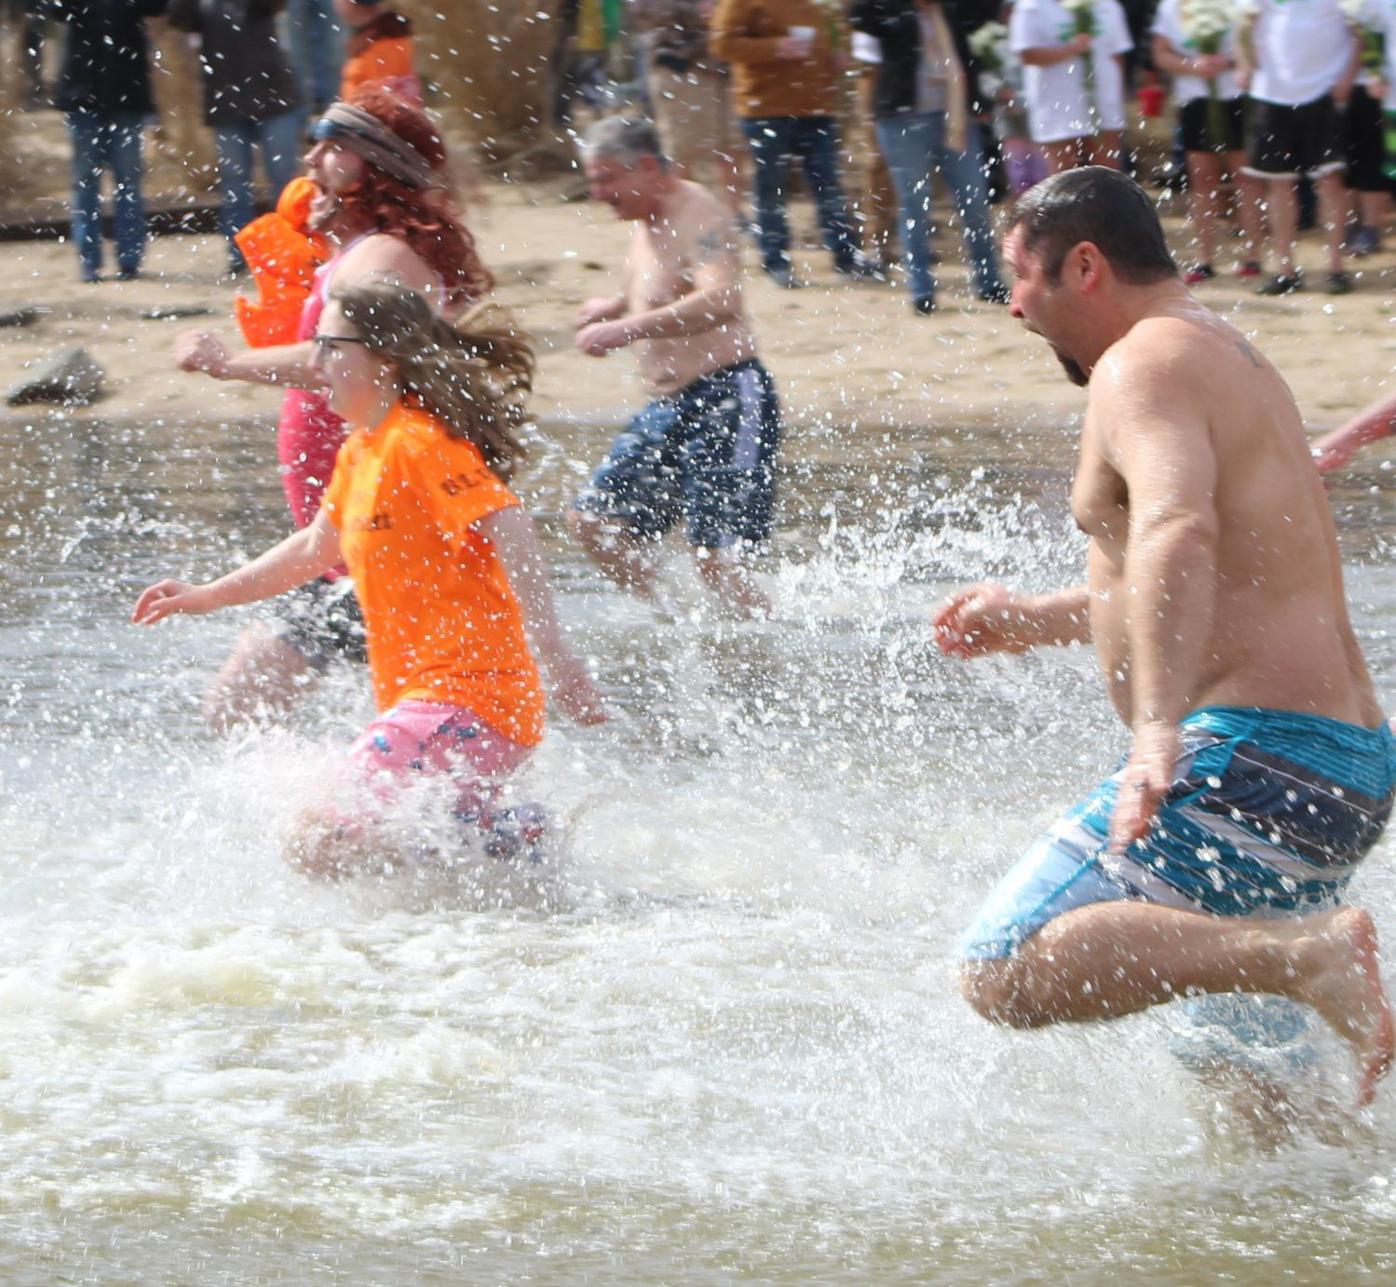 What A Splash Scenes From The 21st Annual Cecil County Ice Splash